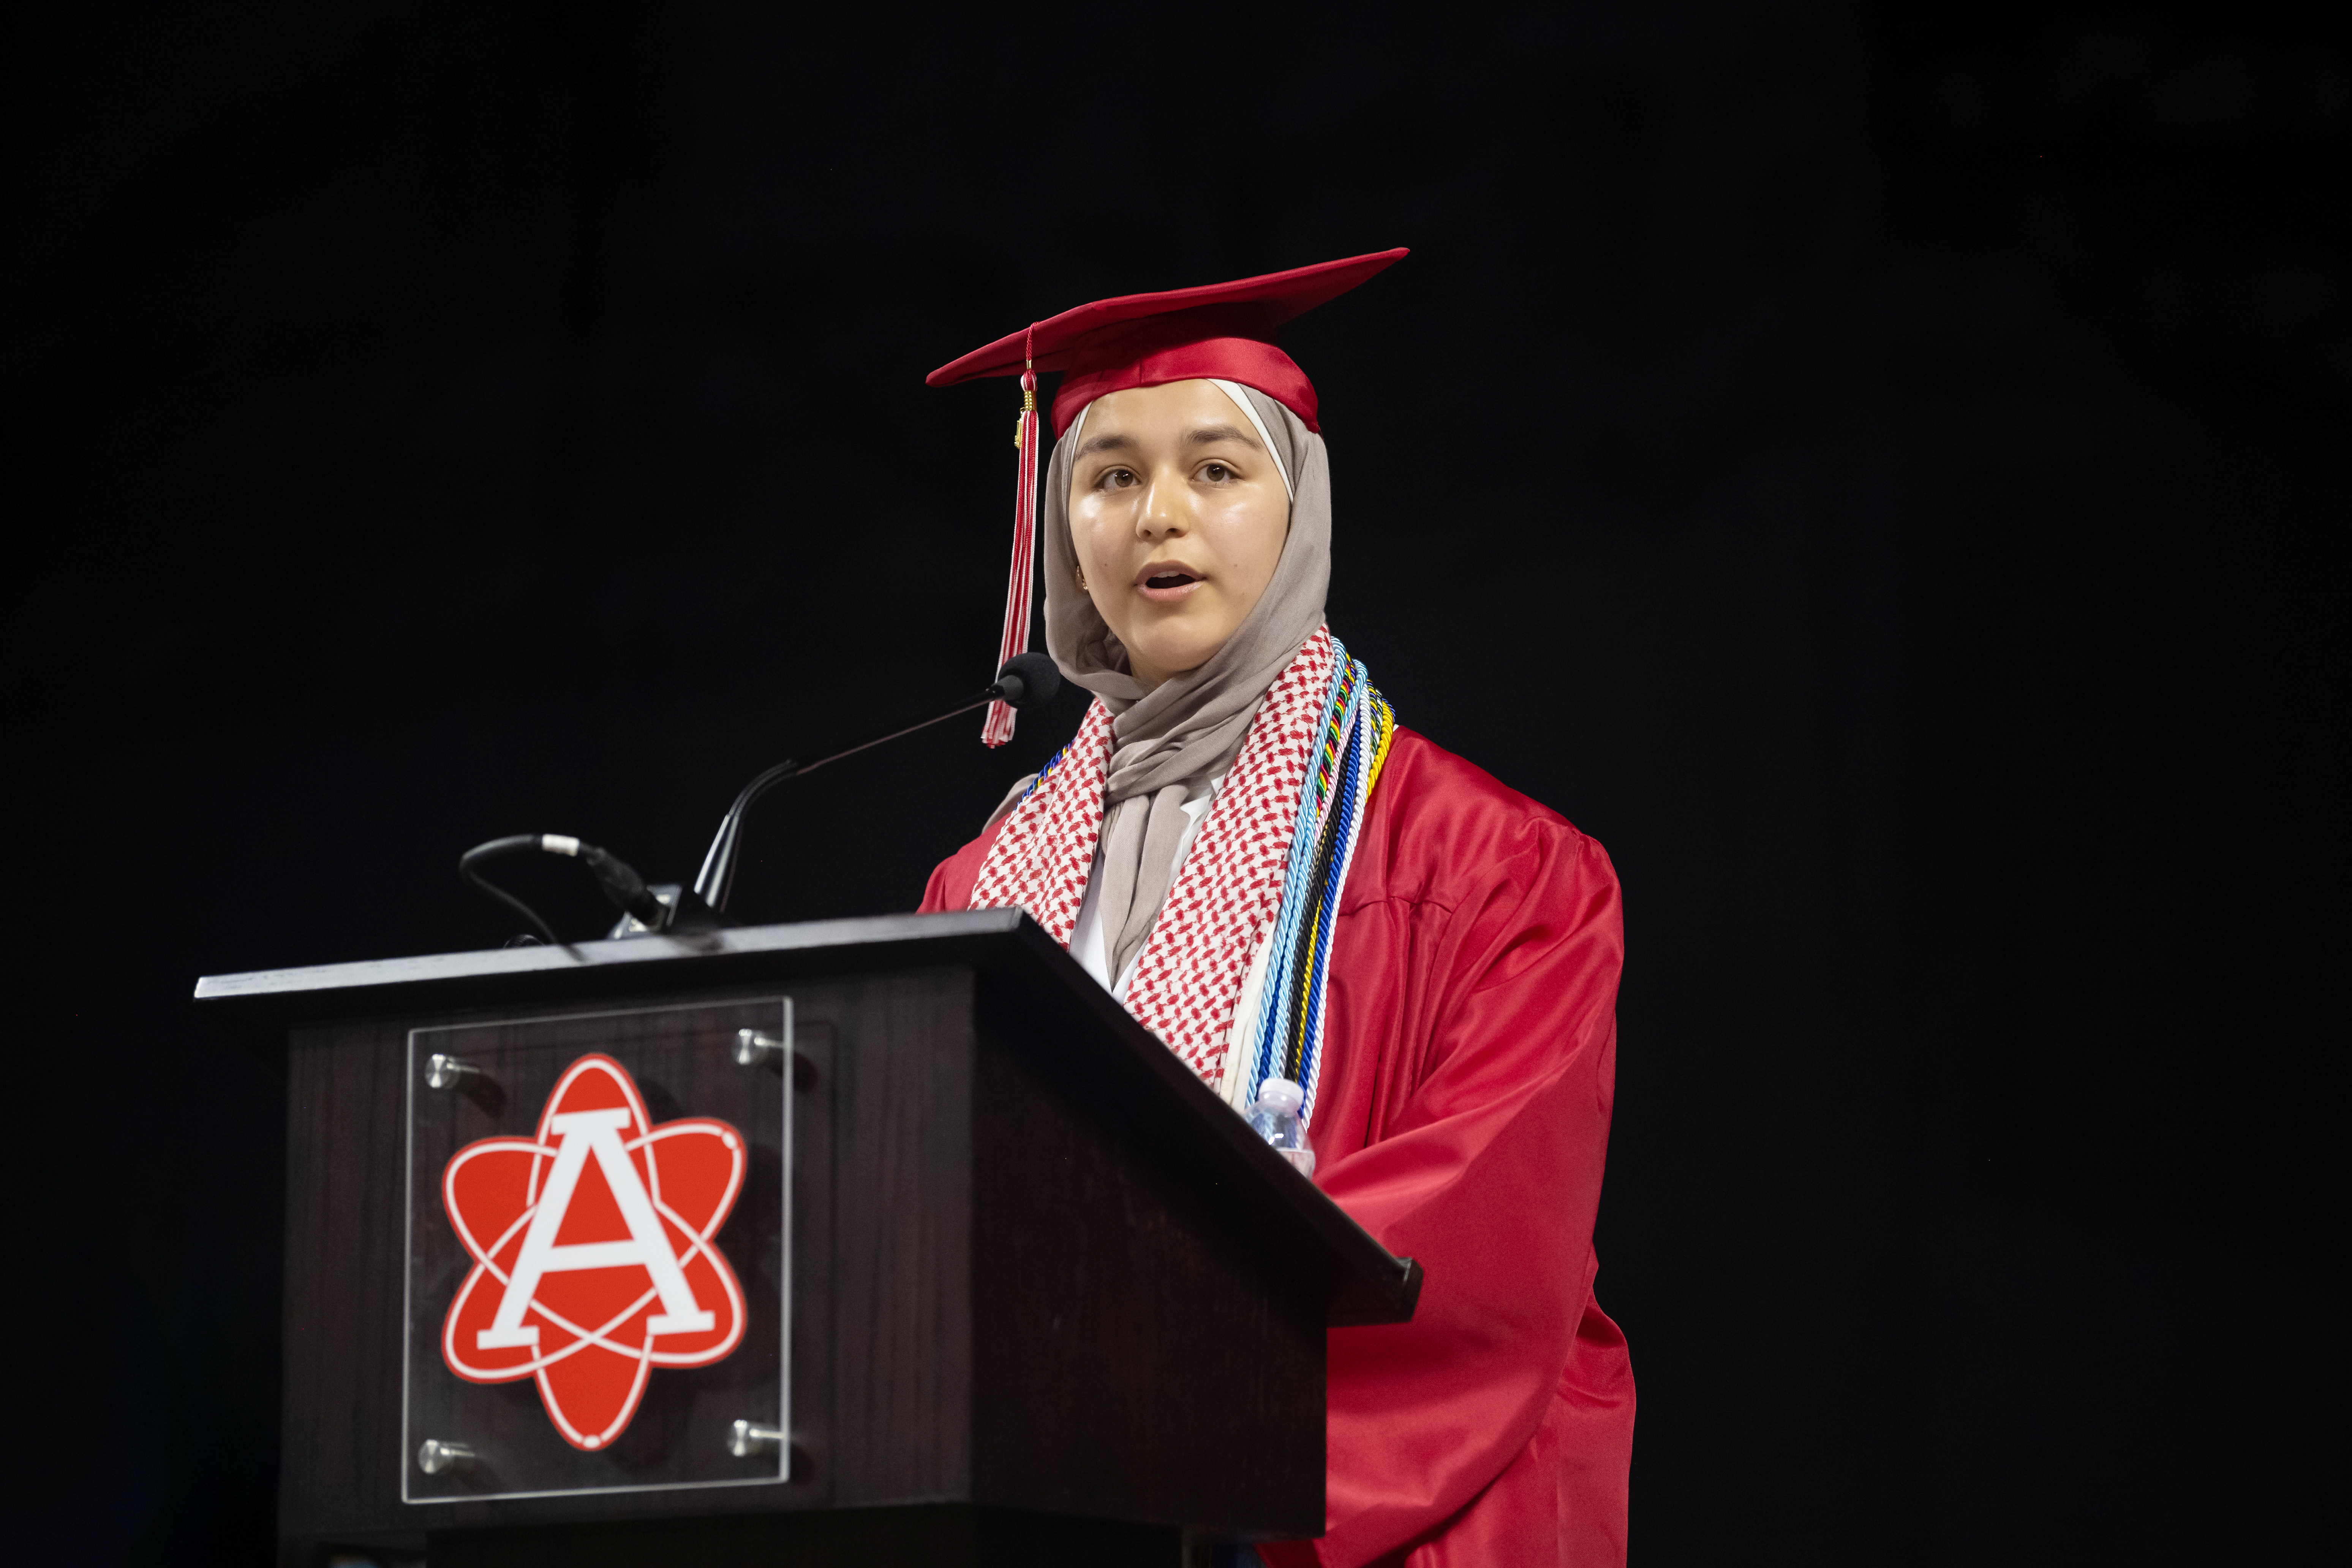 Annandale HS Class of 2024 alum and co-founder of Dunya Club Sosan speaking at her graduation